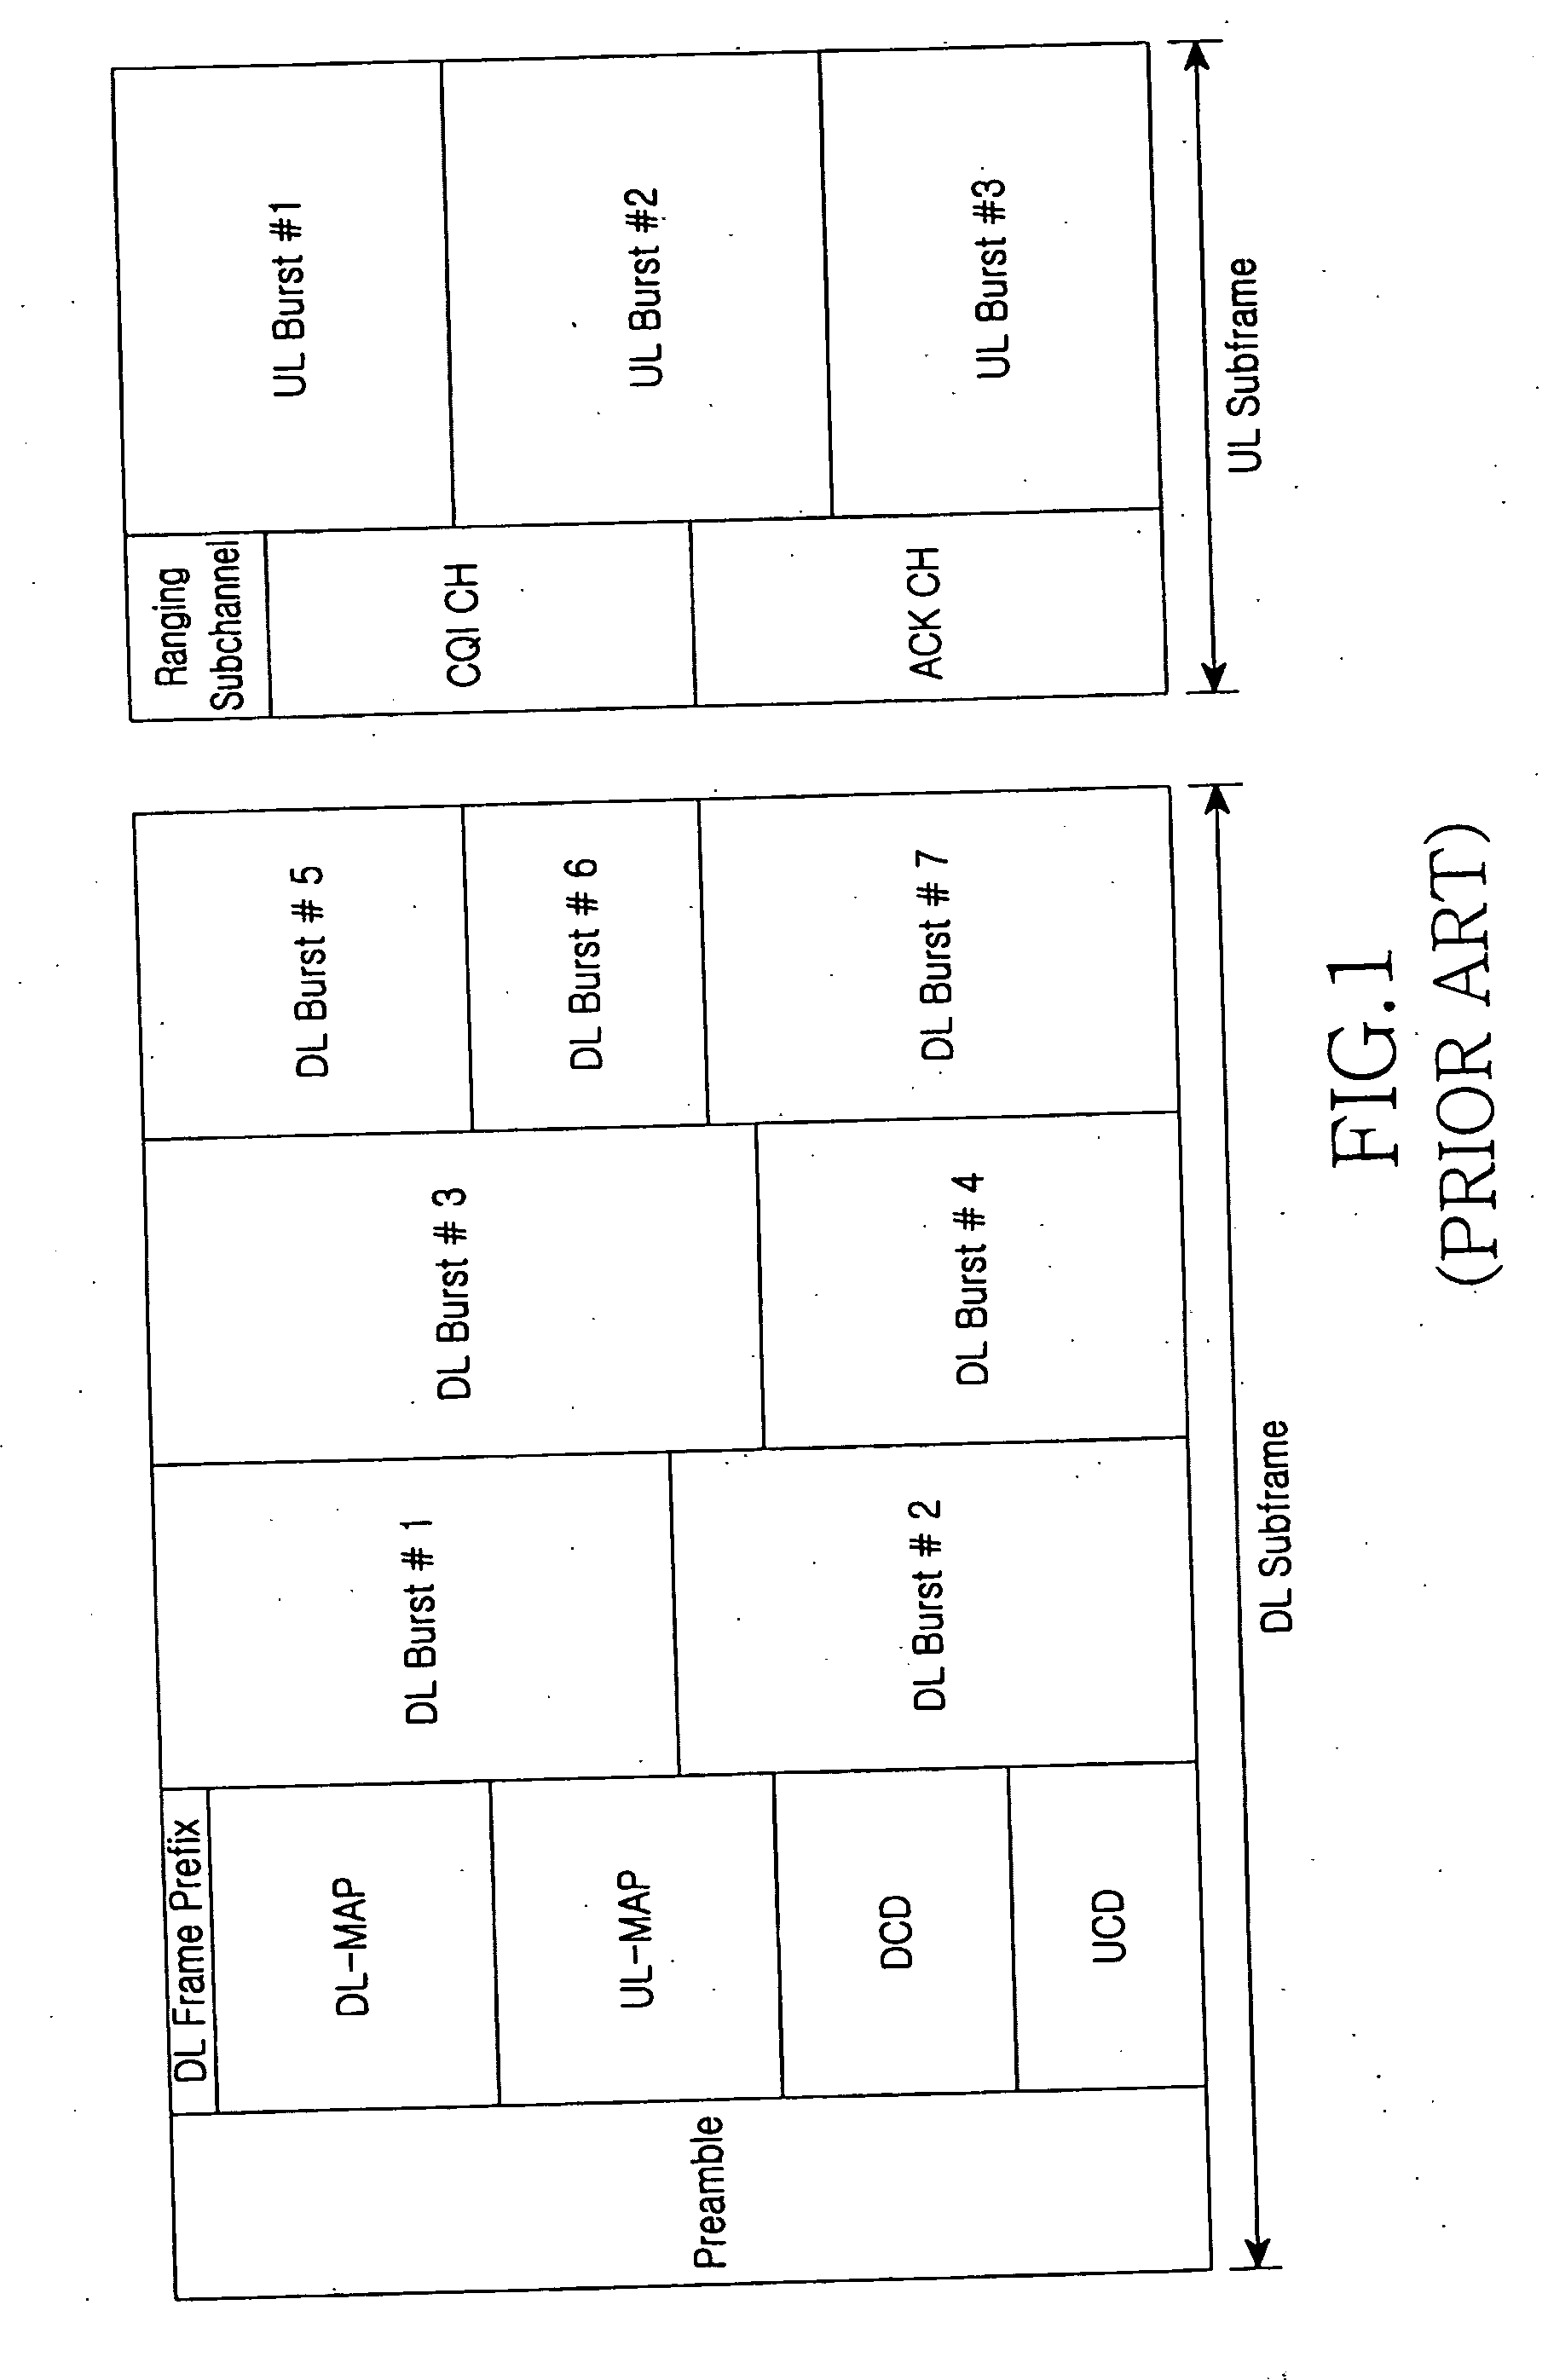 Method for generating a frame in an orthogonal frequency division multiple access communication system